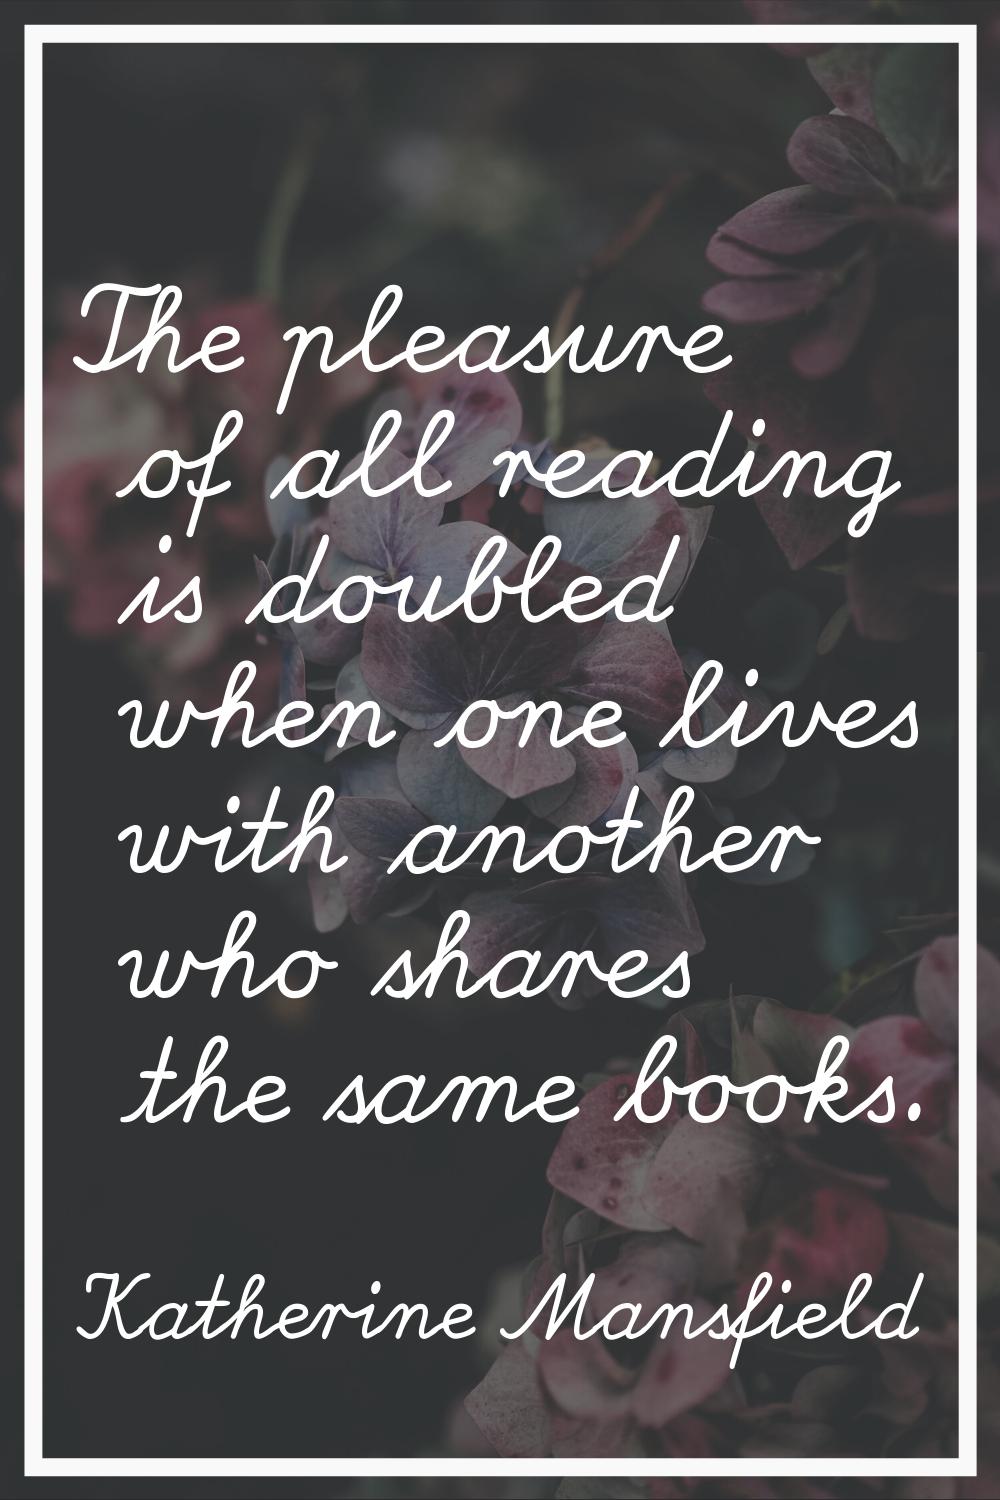 The pleasure of all reading is doubled when one lives with another who shares the same books.